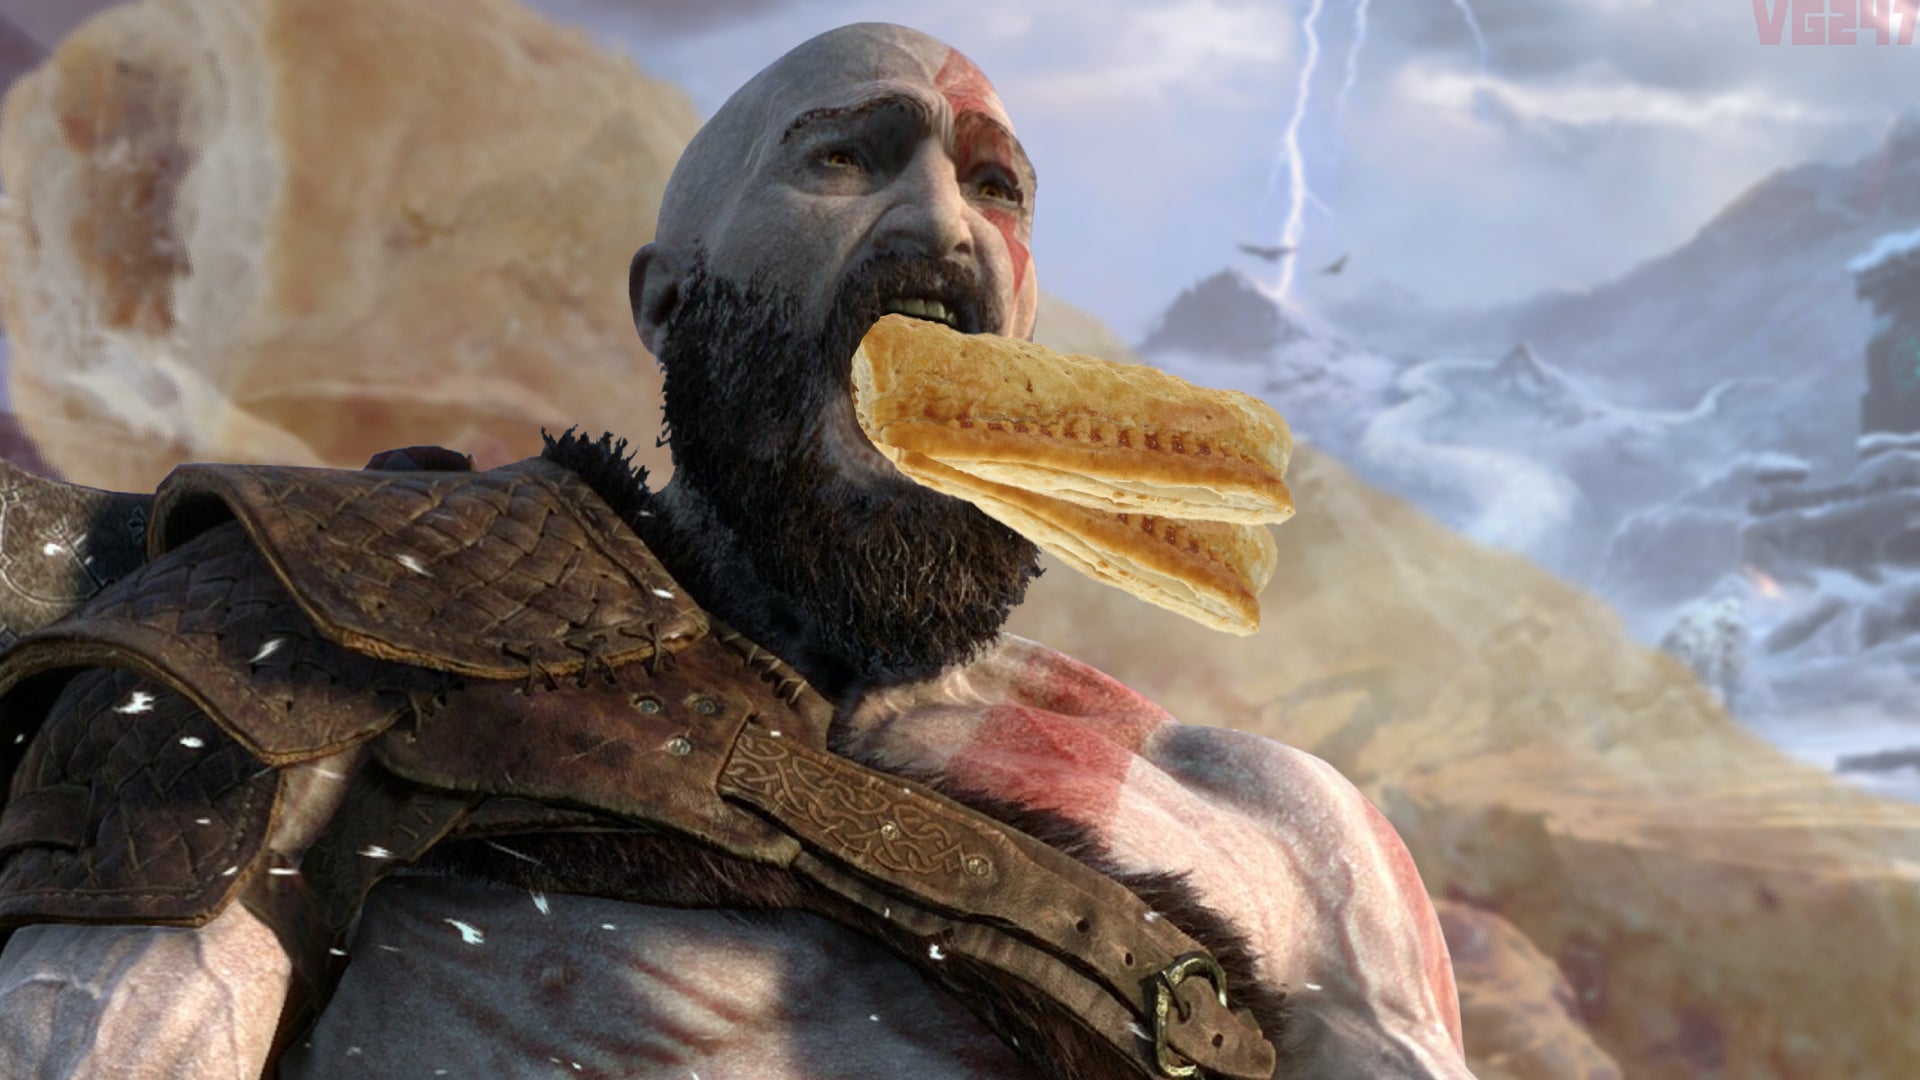 How many Greggs vegan sausage rolls does it cost to complete God of War Ragnarok on PS5?